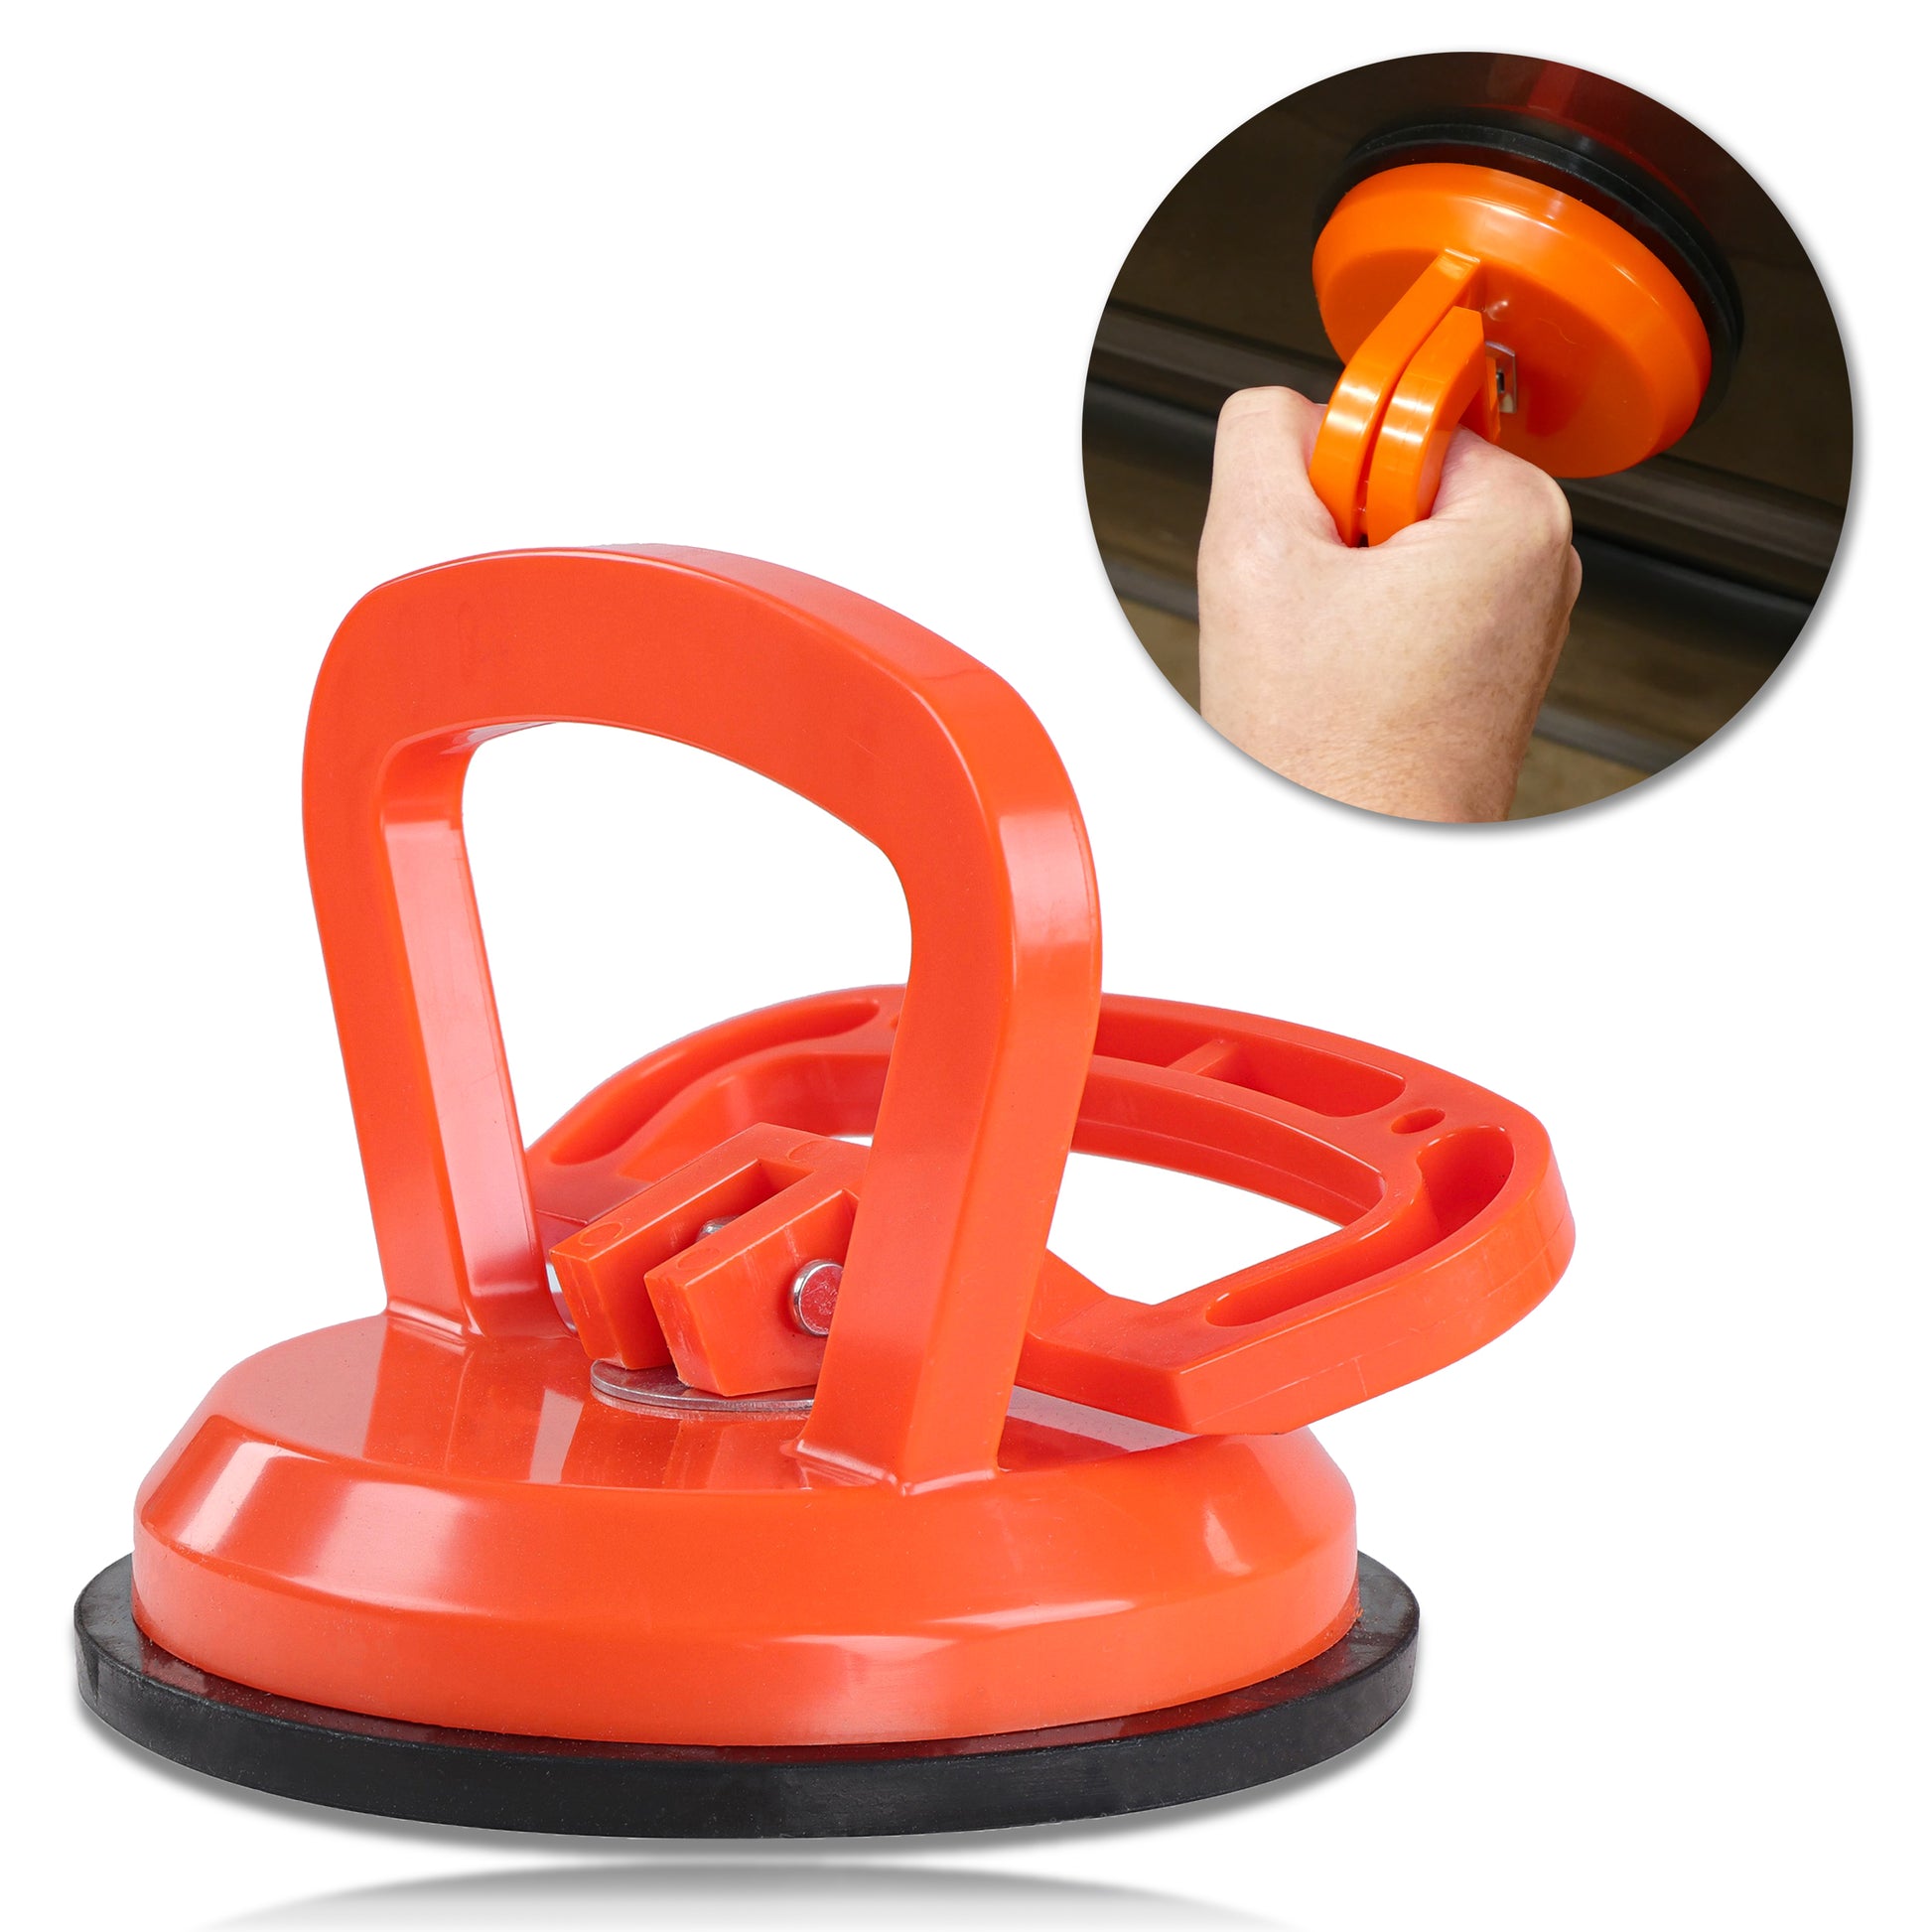 Car Dent Suction Cup Auto Body Dent Puller Removal Tool for dent Remover  repair